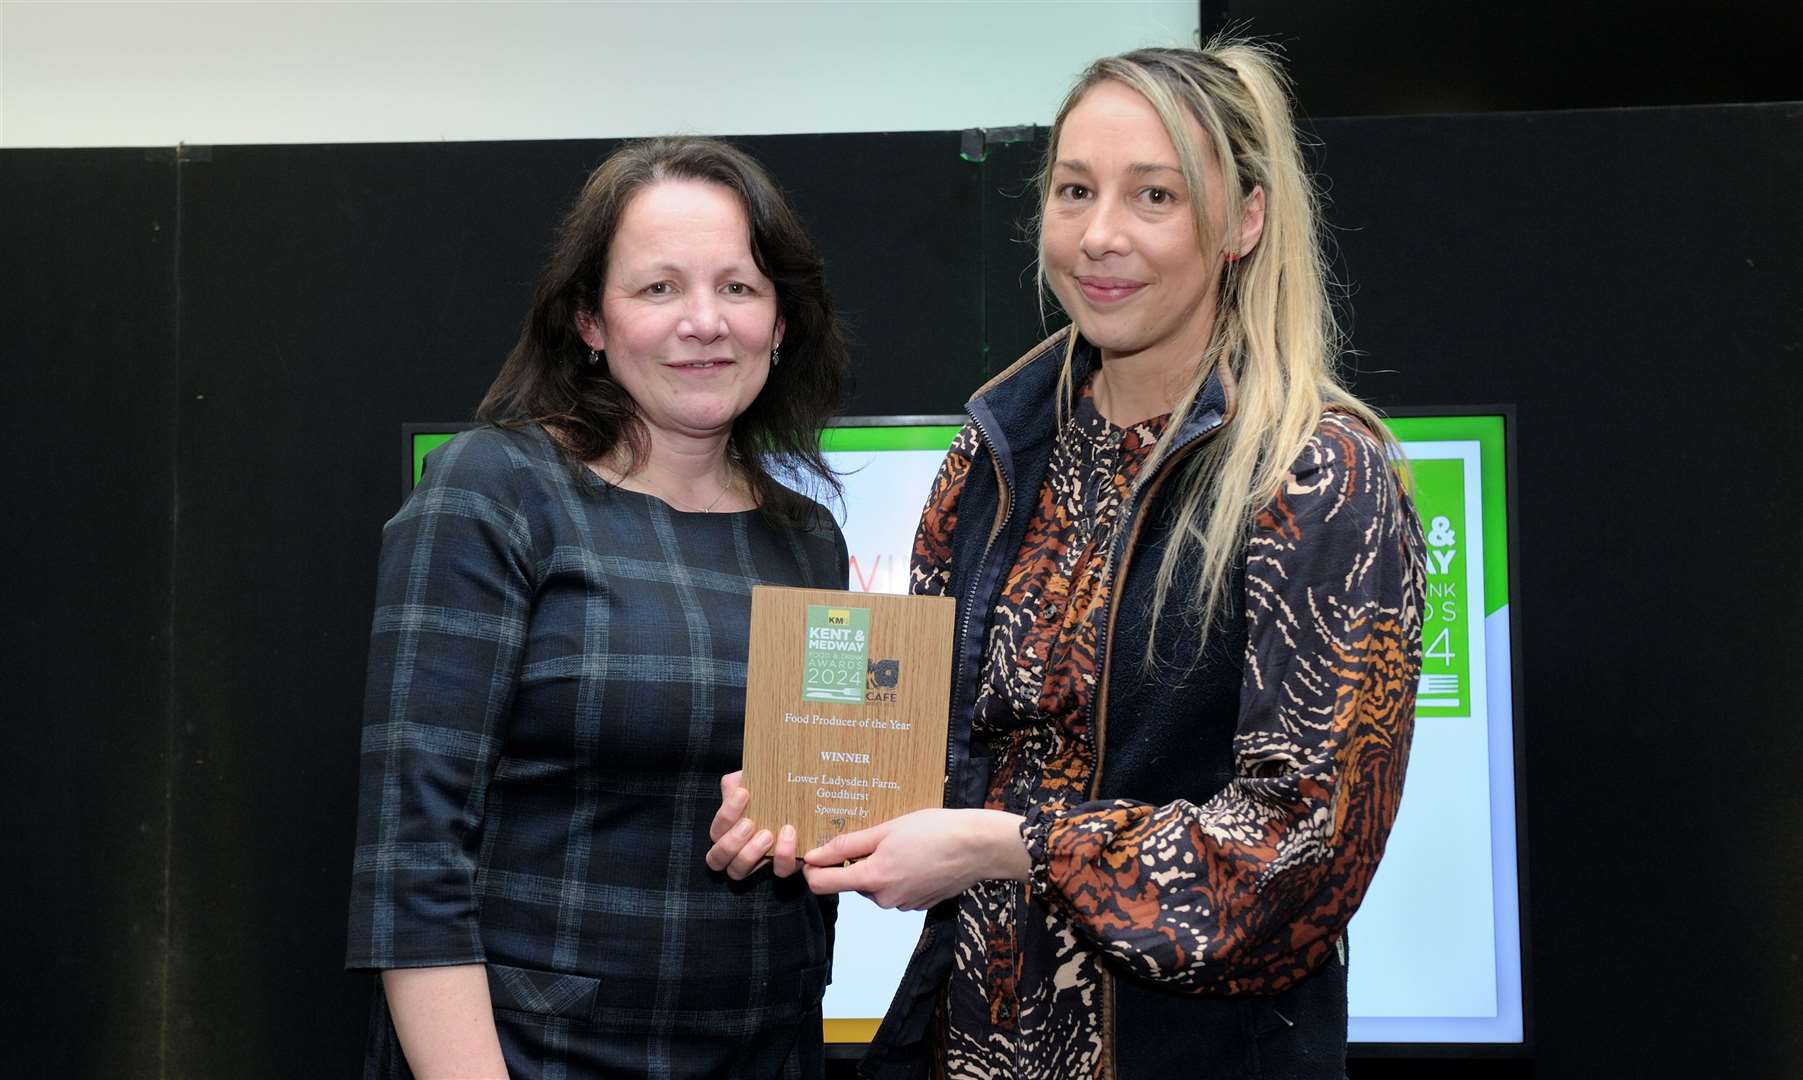 Angela Cole (left) of Shepherd Neame presented Suzie Kember (right) with the award for Lower Ladysden Farm, a family-run farm where visitors can pick their own fresh fruit and vegetables throughout the season, including pumpkins in the autumn. Picture: Simon Hildrew